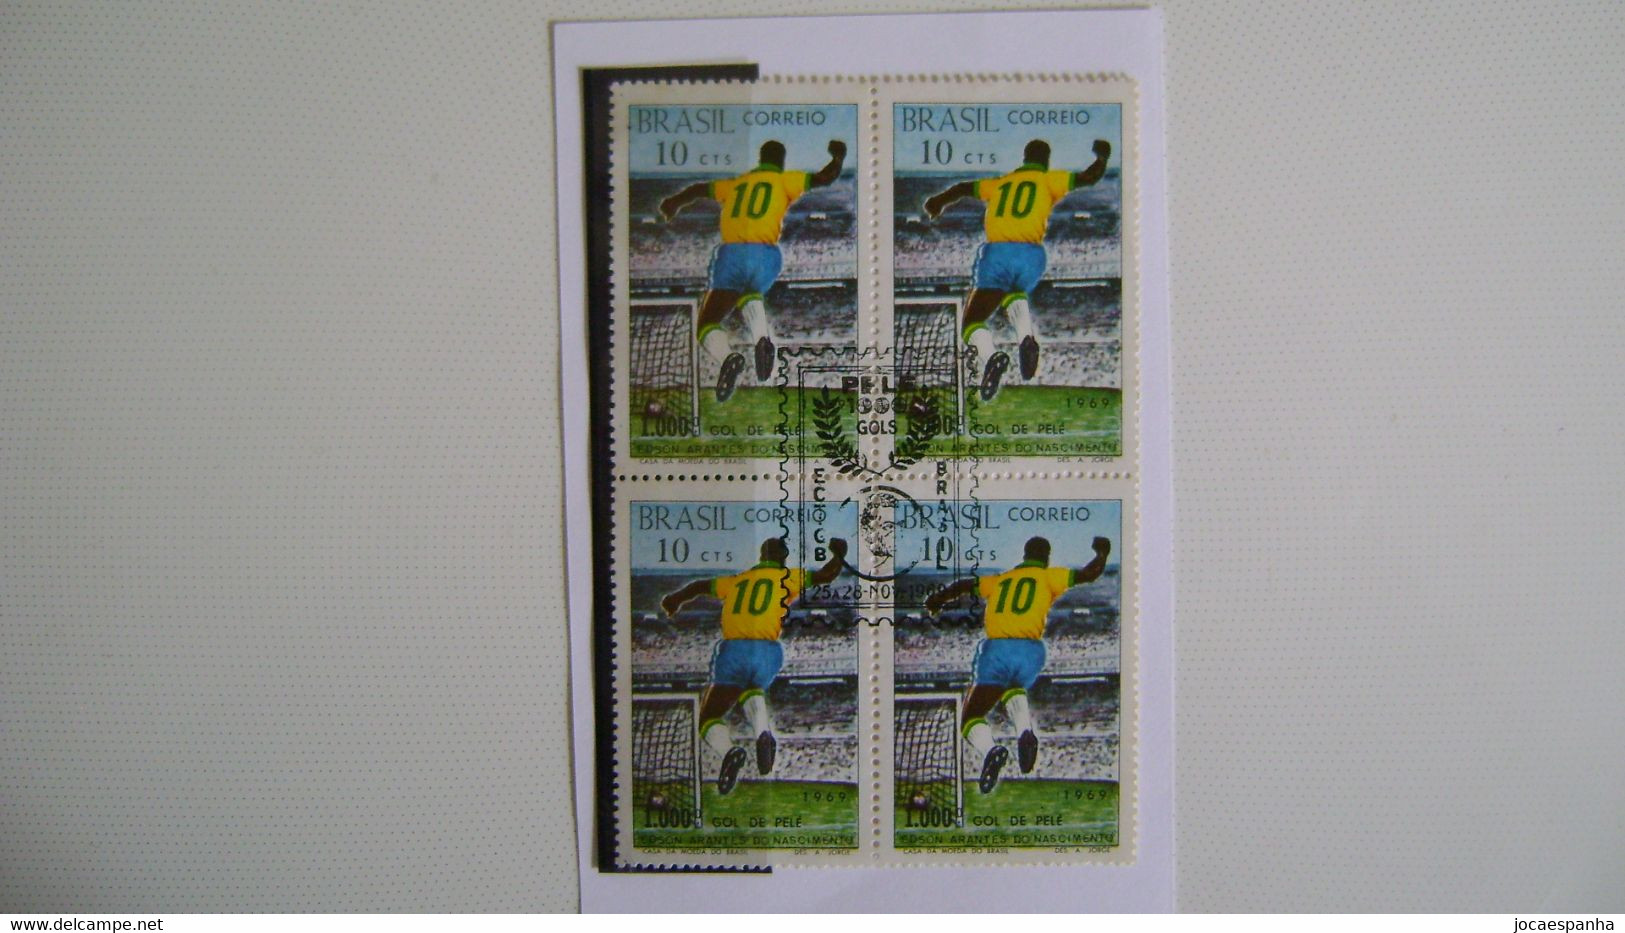 BRAZIL / BRASIL - STAMP ON COURT OF THE 1000th GOL OF THE PELE KING WITH COMMEMORATIVE STAMP IN 1969 - Used Stamps